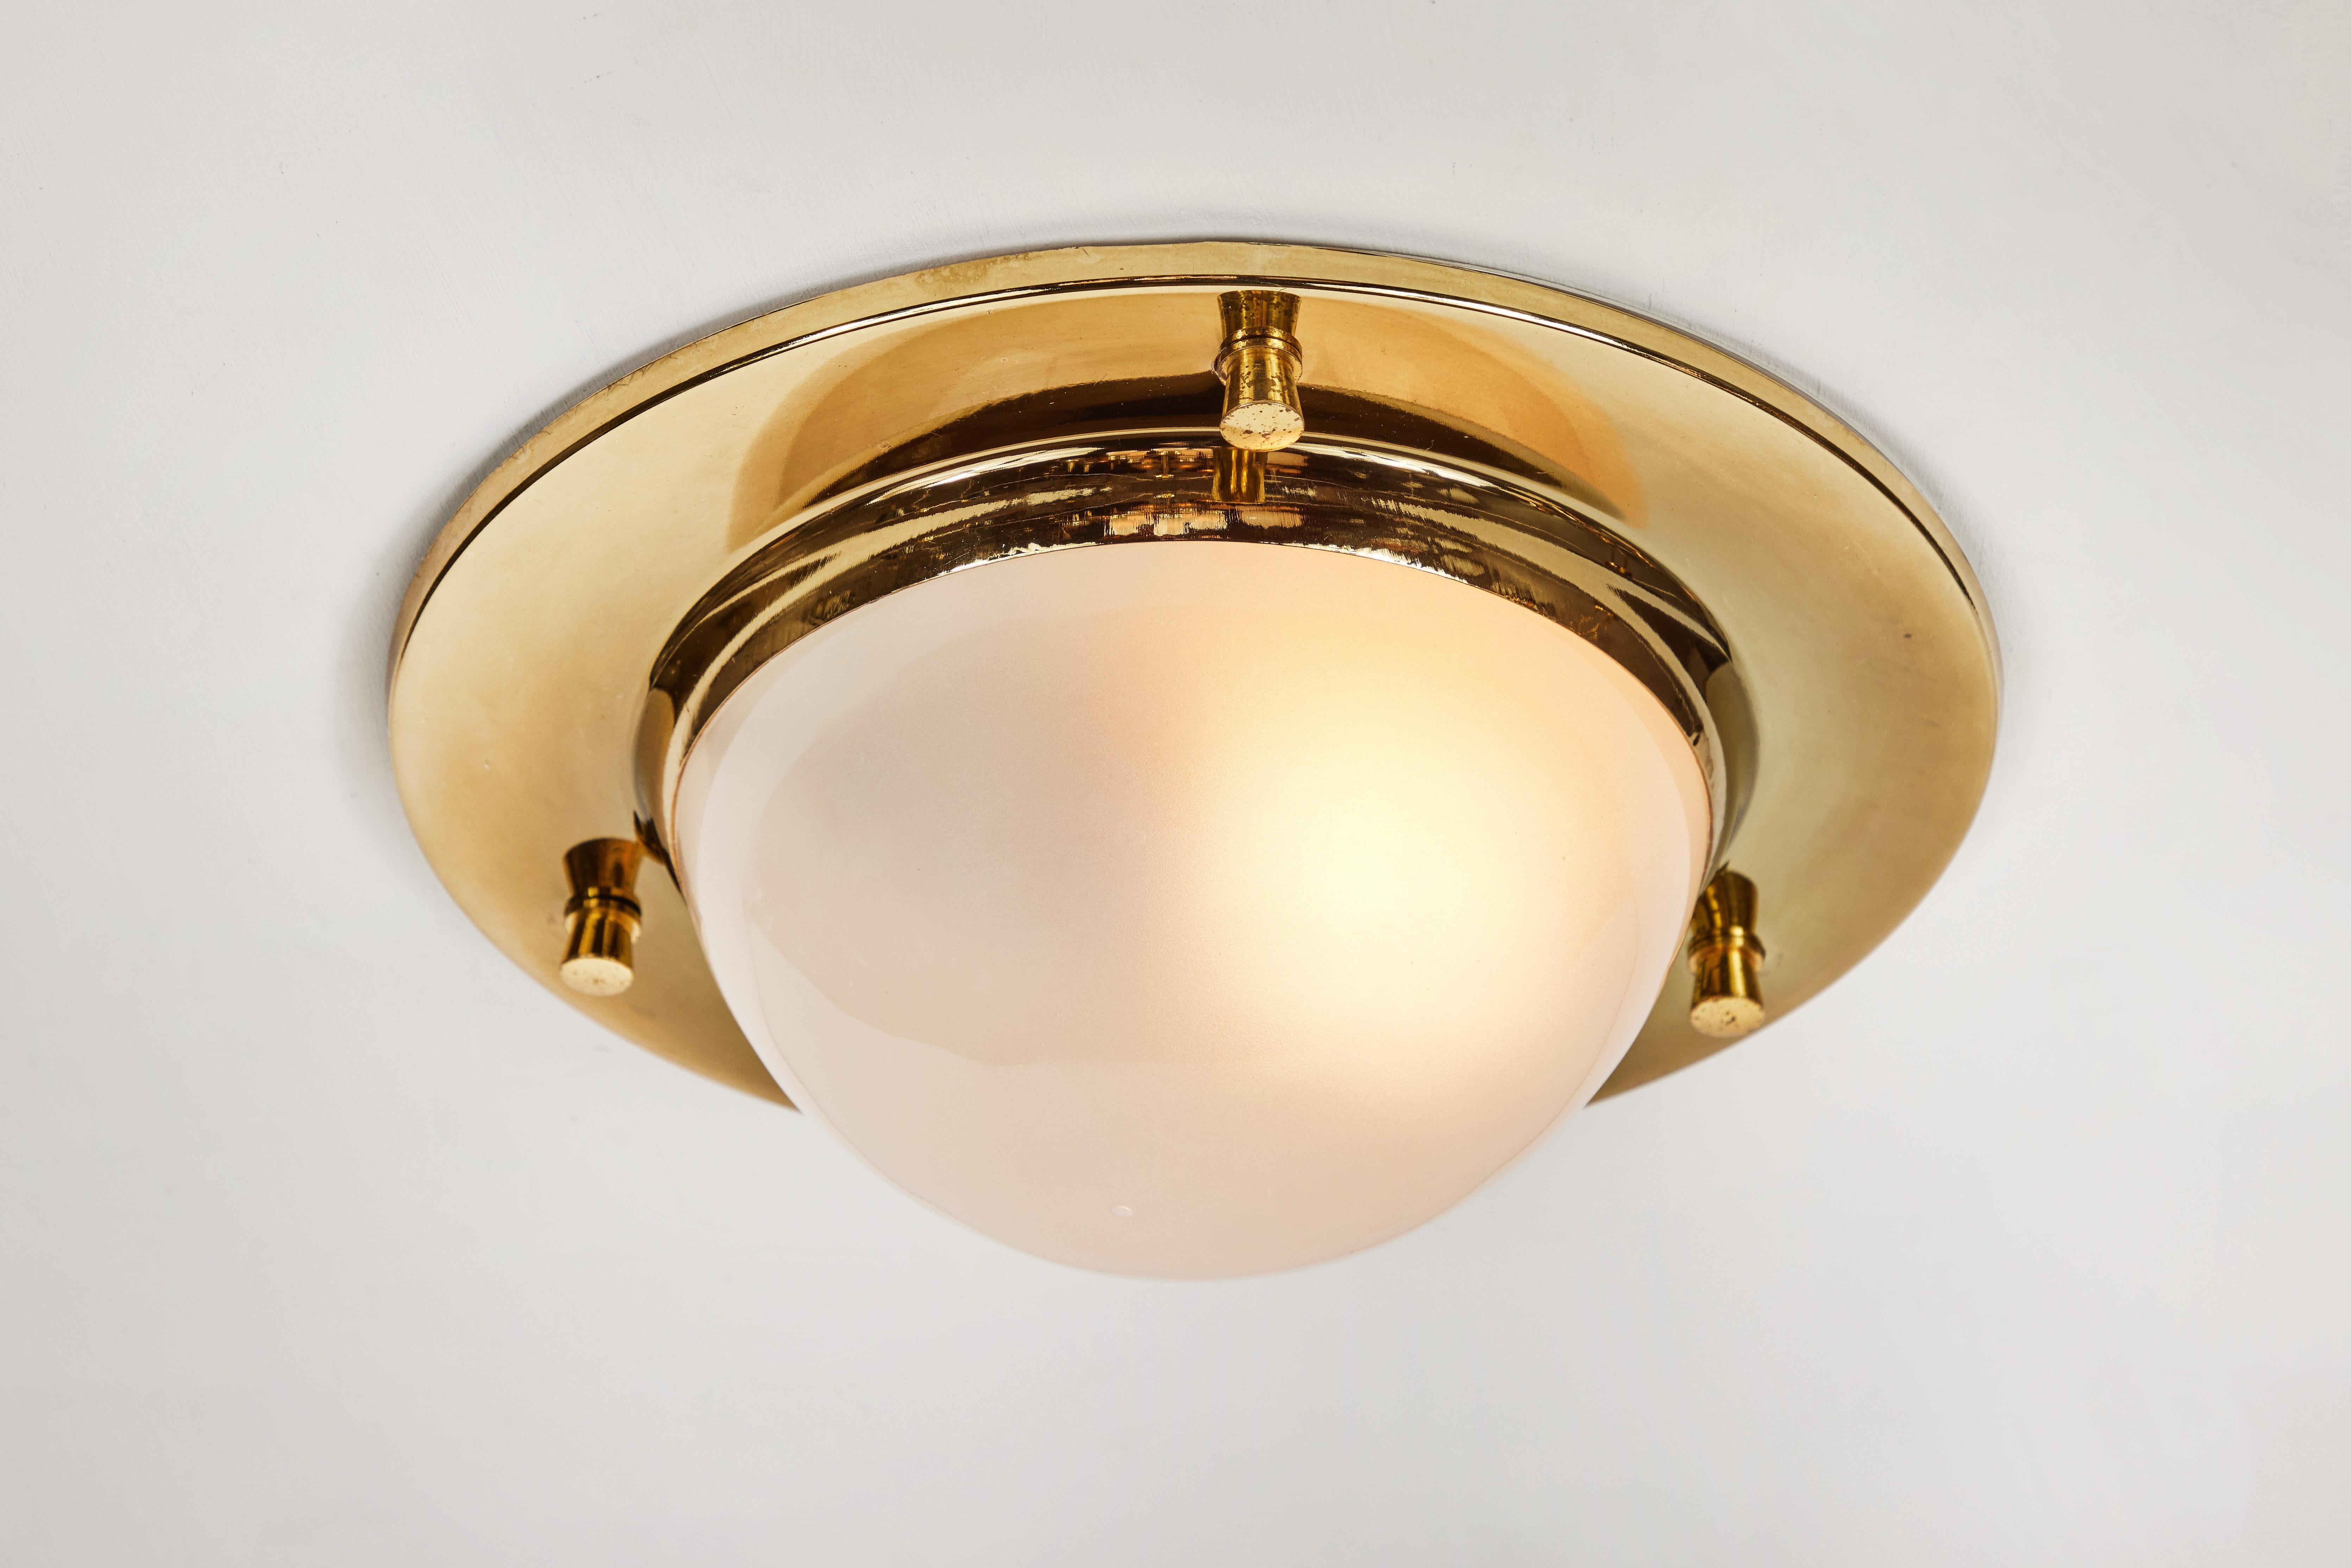 1960s Luigi Caccia Dominioni large 'Tommy' ceiling light for Azucena. An iconic design executed in brass and opaline glass, Italy, circa 1965.

Azucena was one of the most innovative lighting design companies in Italy during the midcentury era,